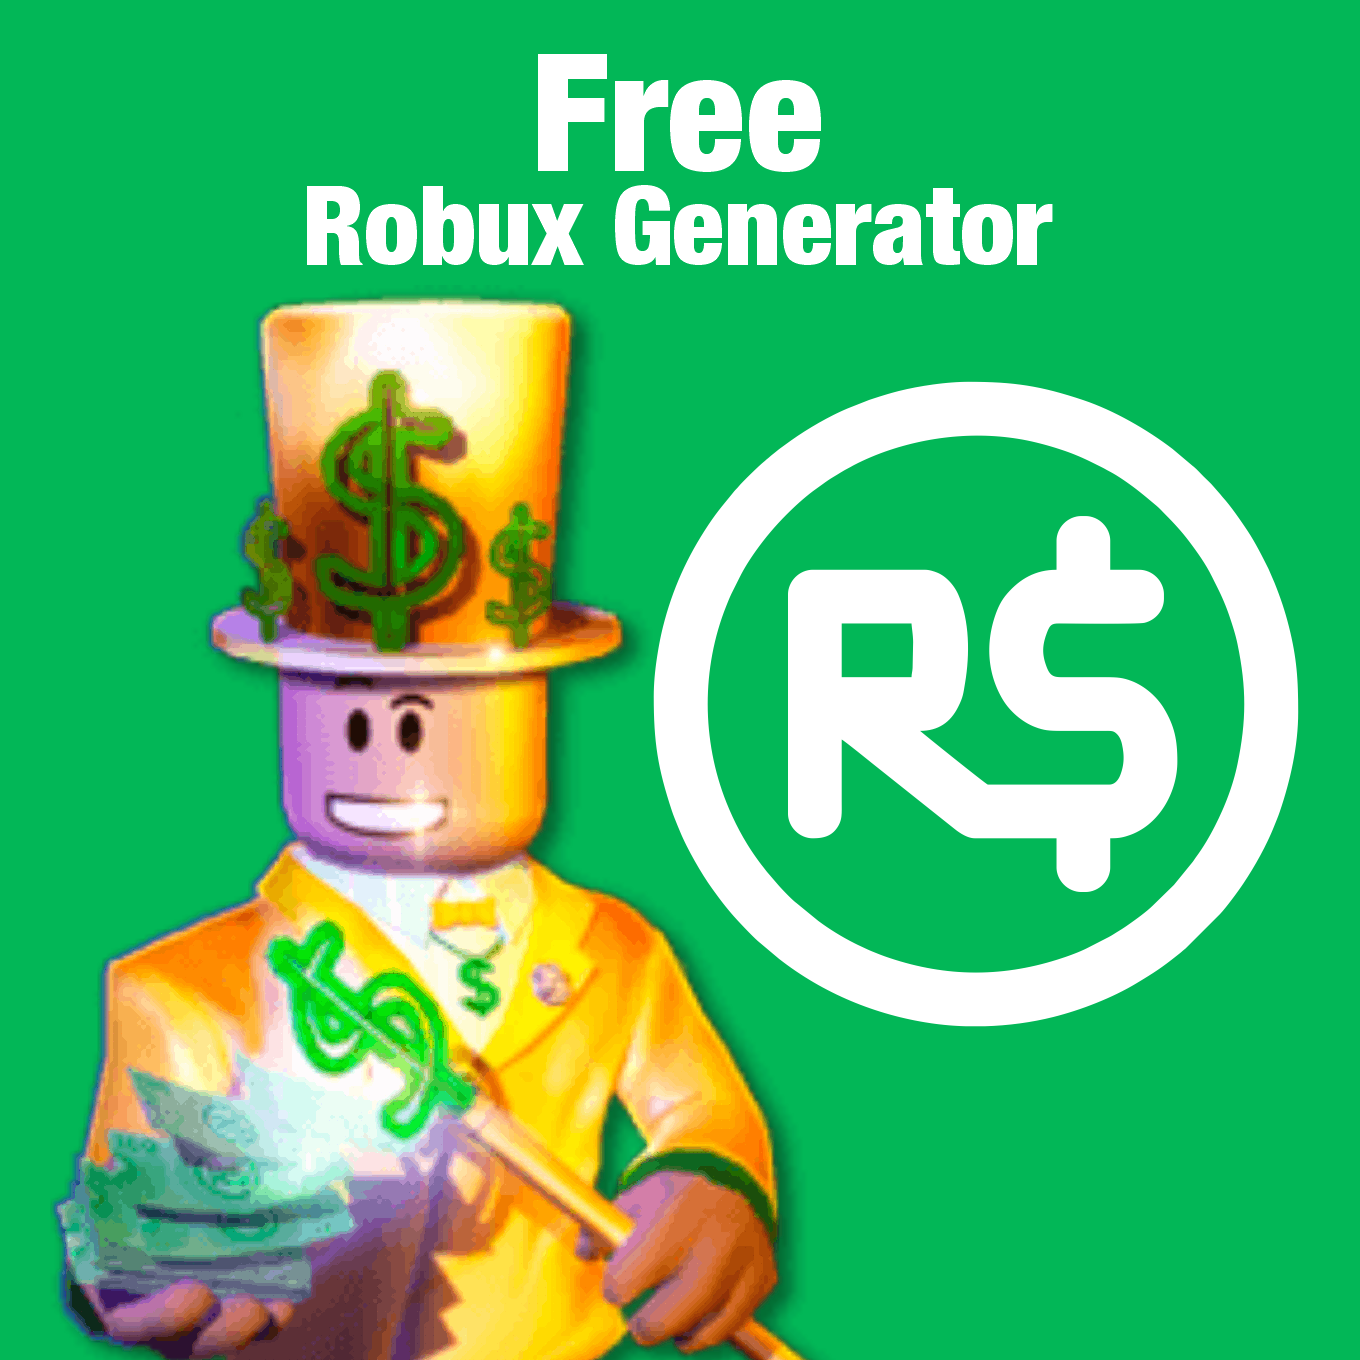 How To Get Free Robux - ulgames resources roblox free robux